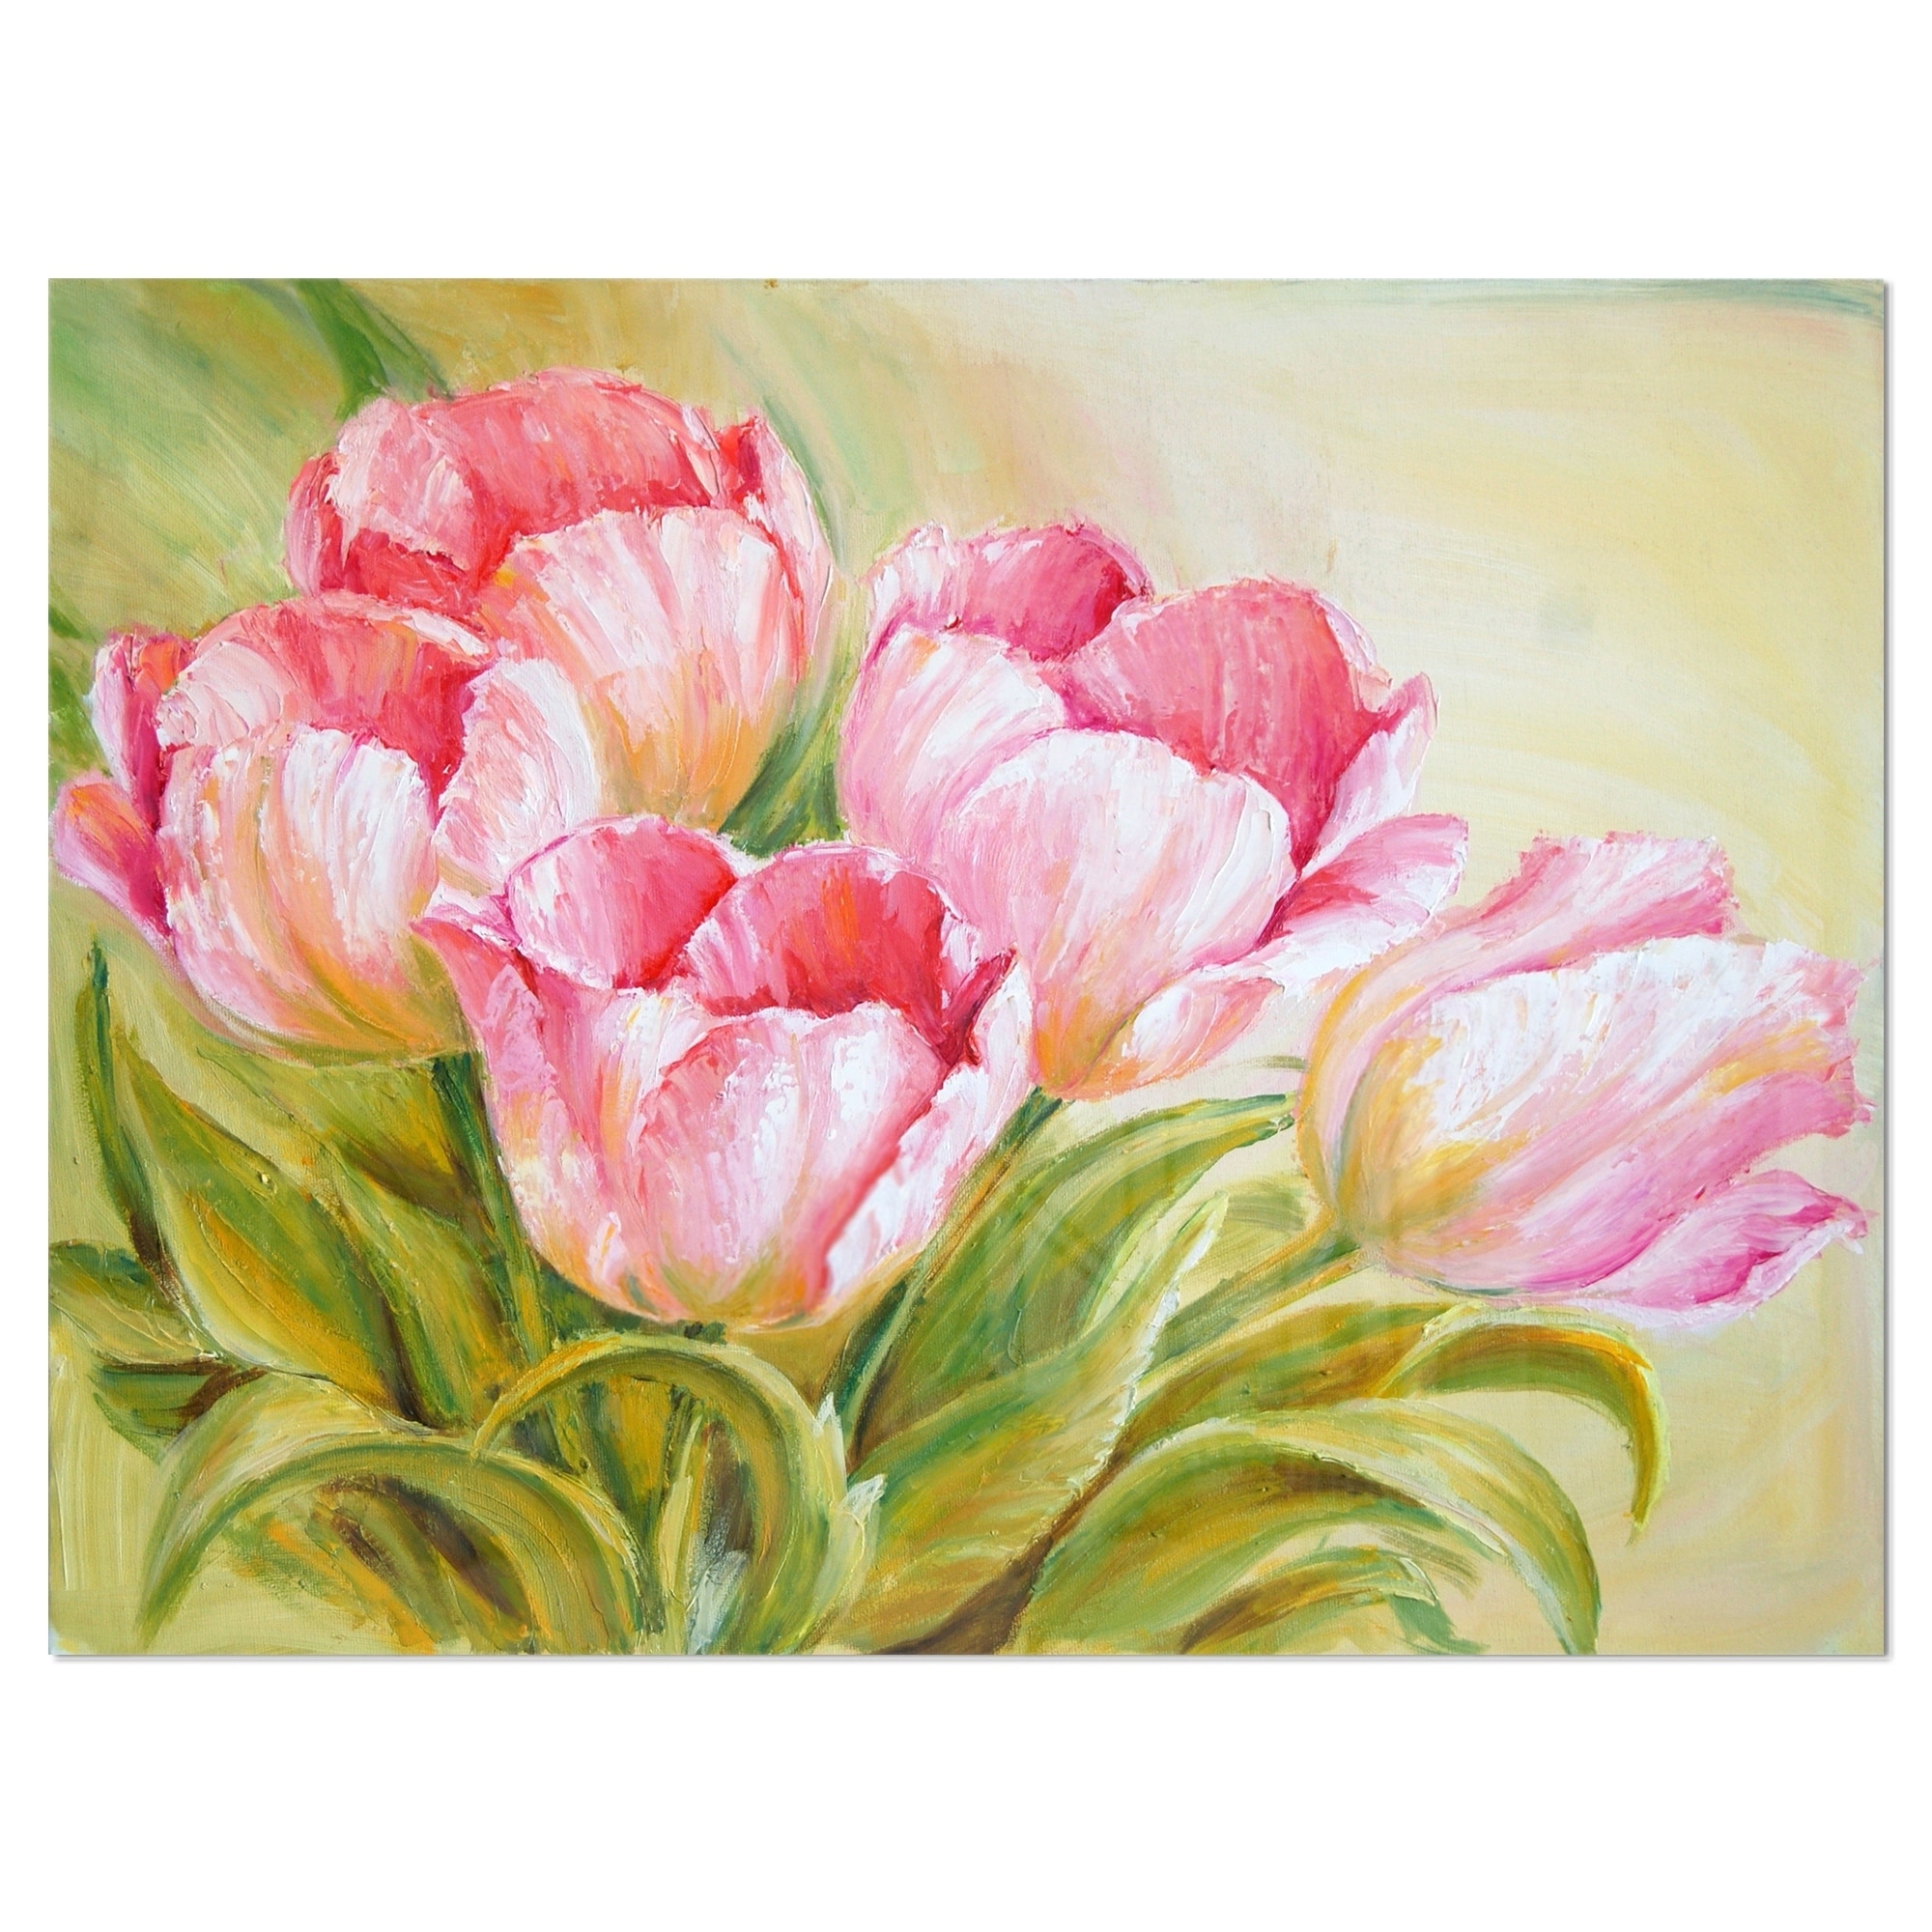 60 in Created On Lightweight Polyester Fabric x 50 in Designart TAP15059-60-50  Tulips and Daffodils in Soft Color and Blur Floral Blanket Décor Art for Home and Office Wall Tapestry Large 